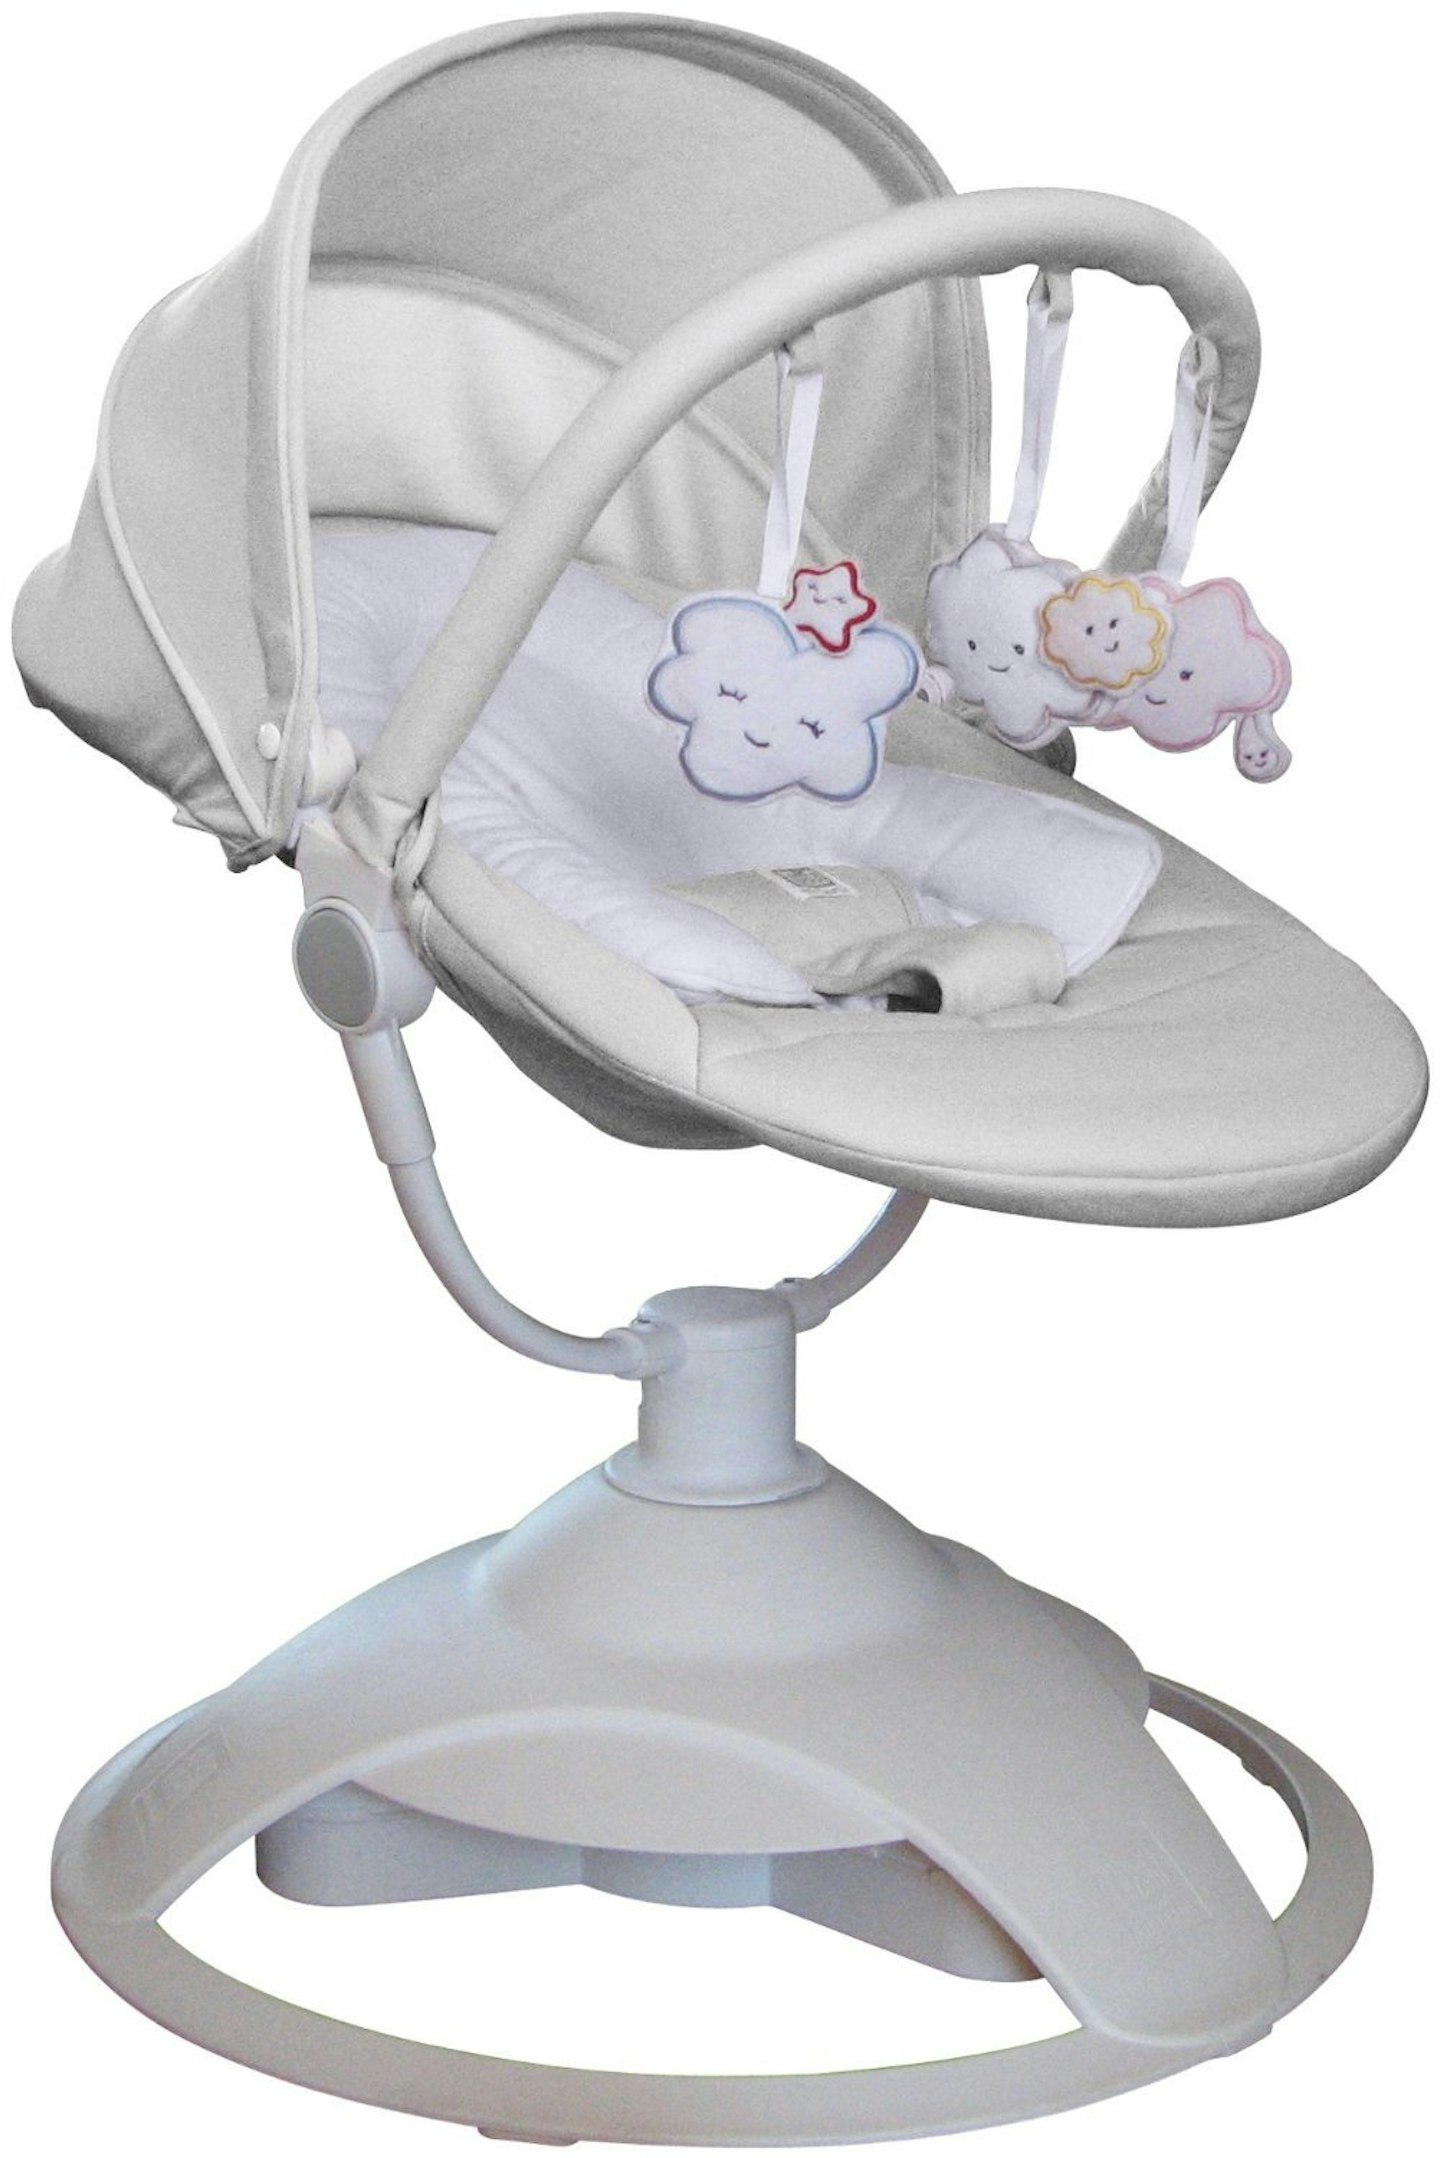 Red Castle Cloudzz Baby Bouncer review